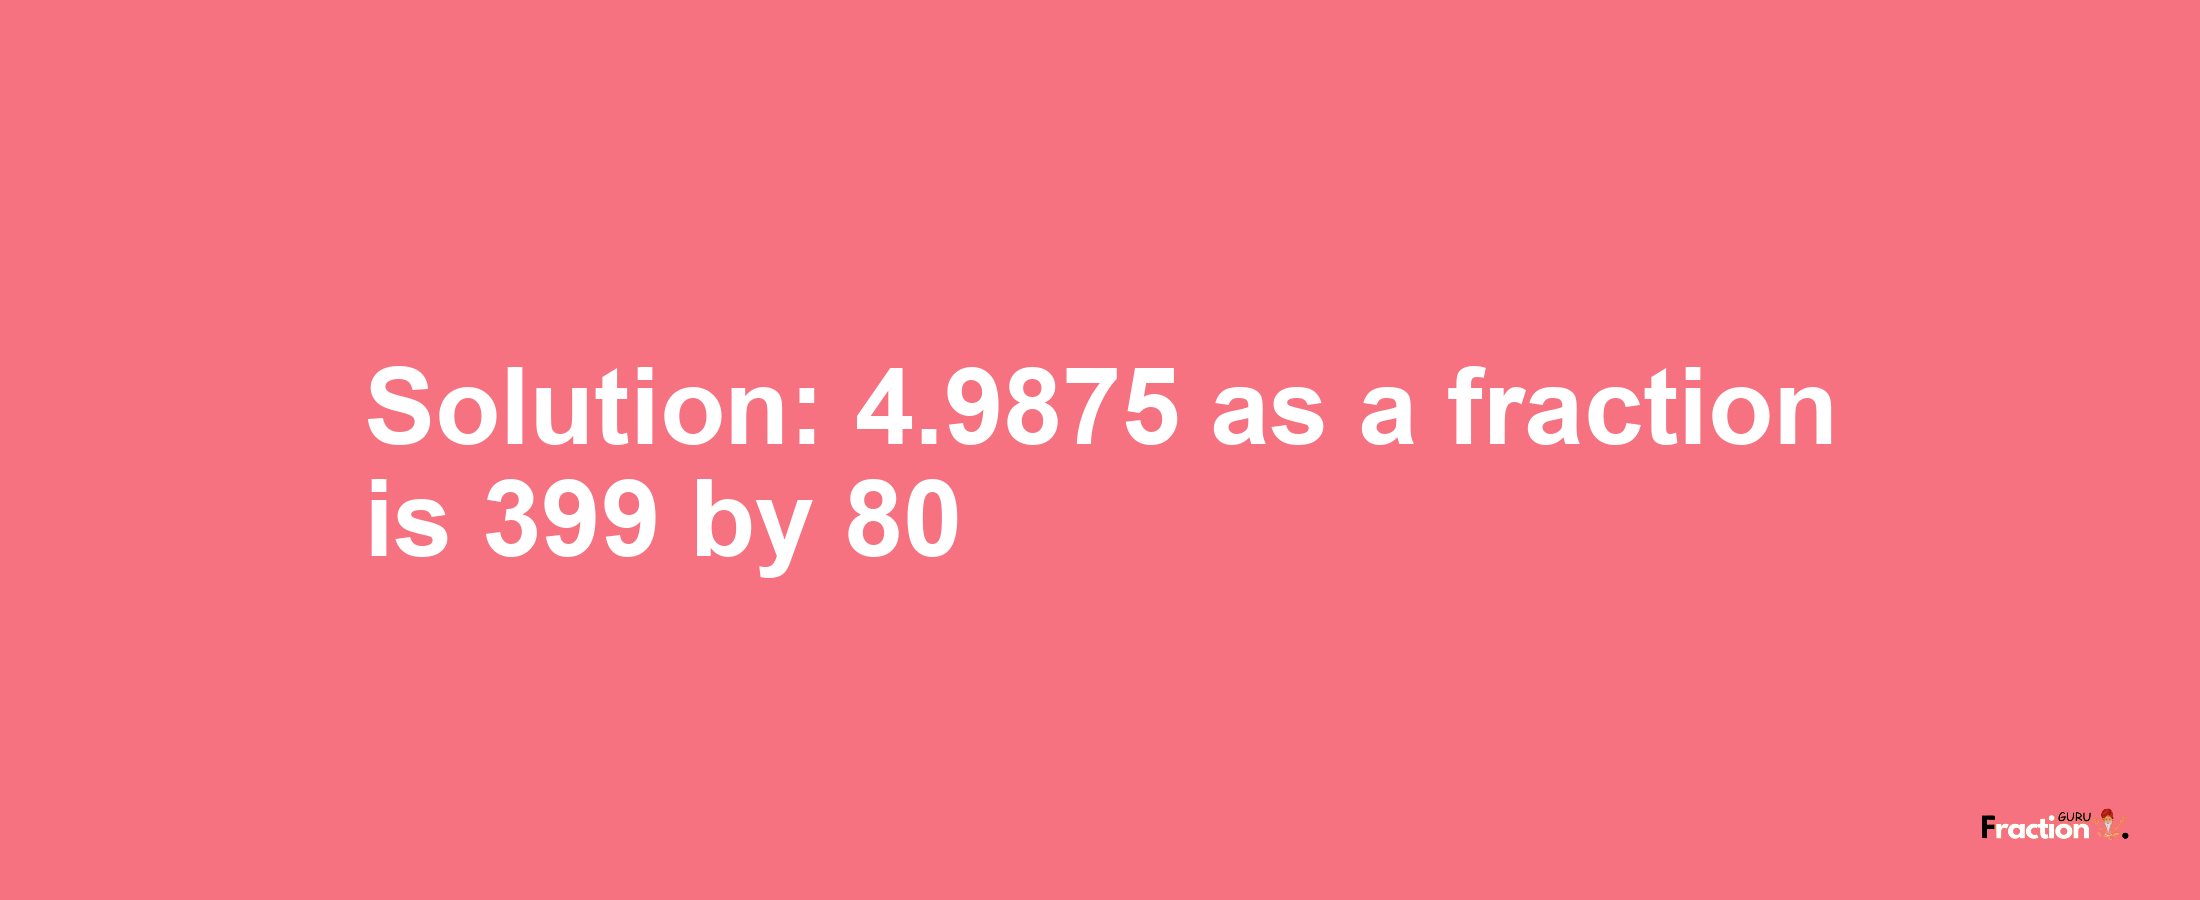 Solution:4.9875 as a fraction is 399/80